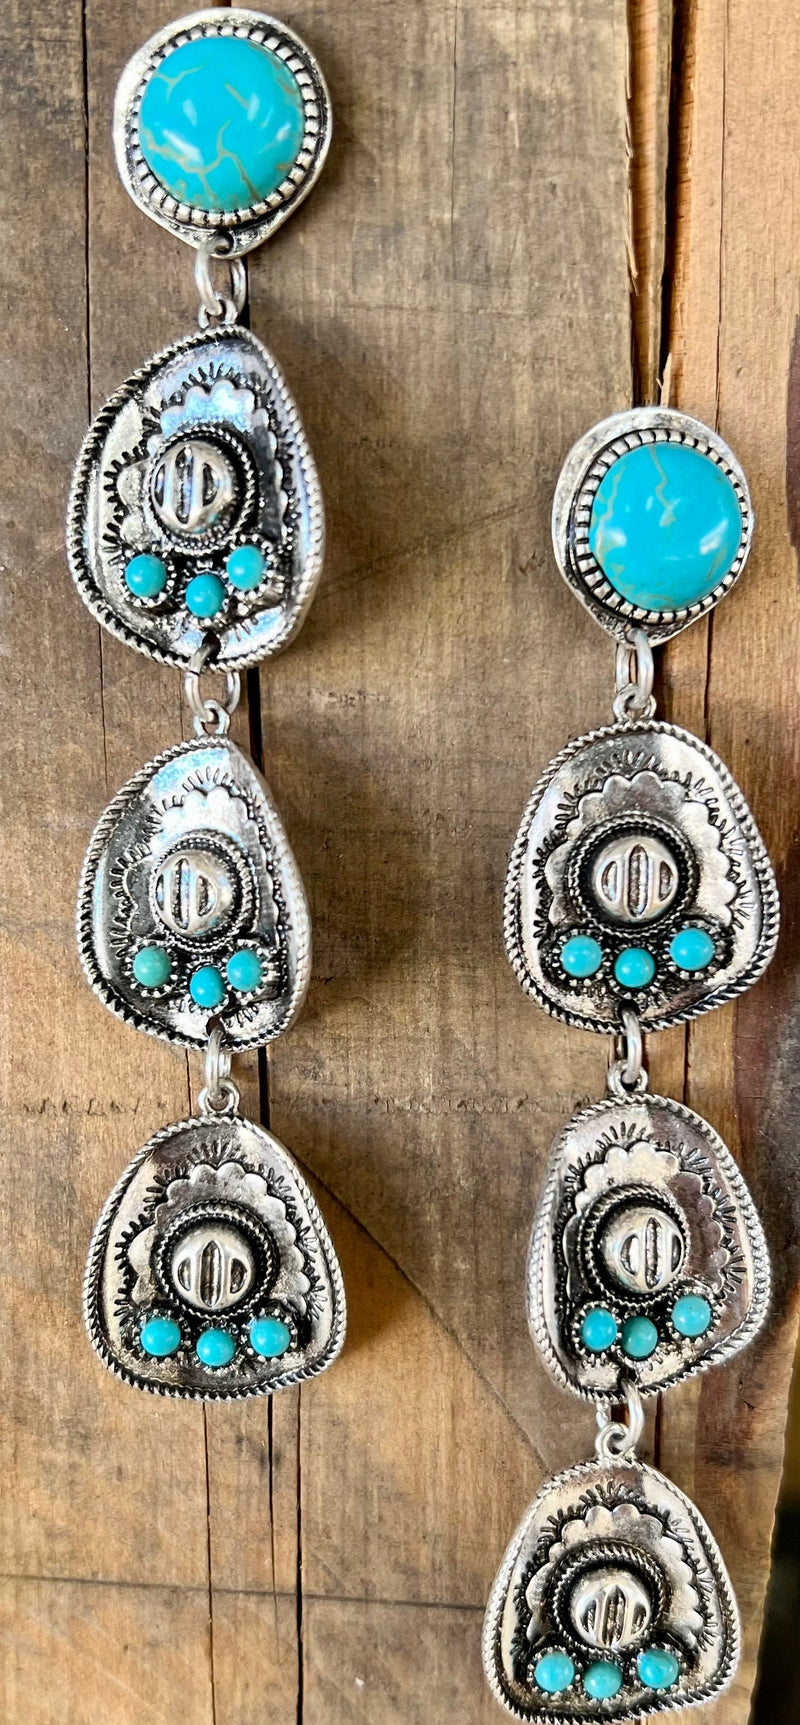 Add some Western flair to any outfit with these stylish Life to Hang Your Hat On Earrings! Not only are they the perfect way to add a pop of daring color to your look, but they also feature a cool cowboy hat shape fashioned out of silver and tastefully adorned with turquoise stones. Show the wild, wild west who's boss with these 4" dangle earrings, secured with the classic fish hook closure. Yeehaw!